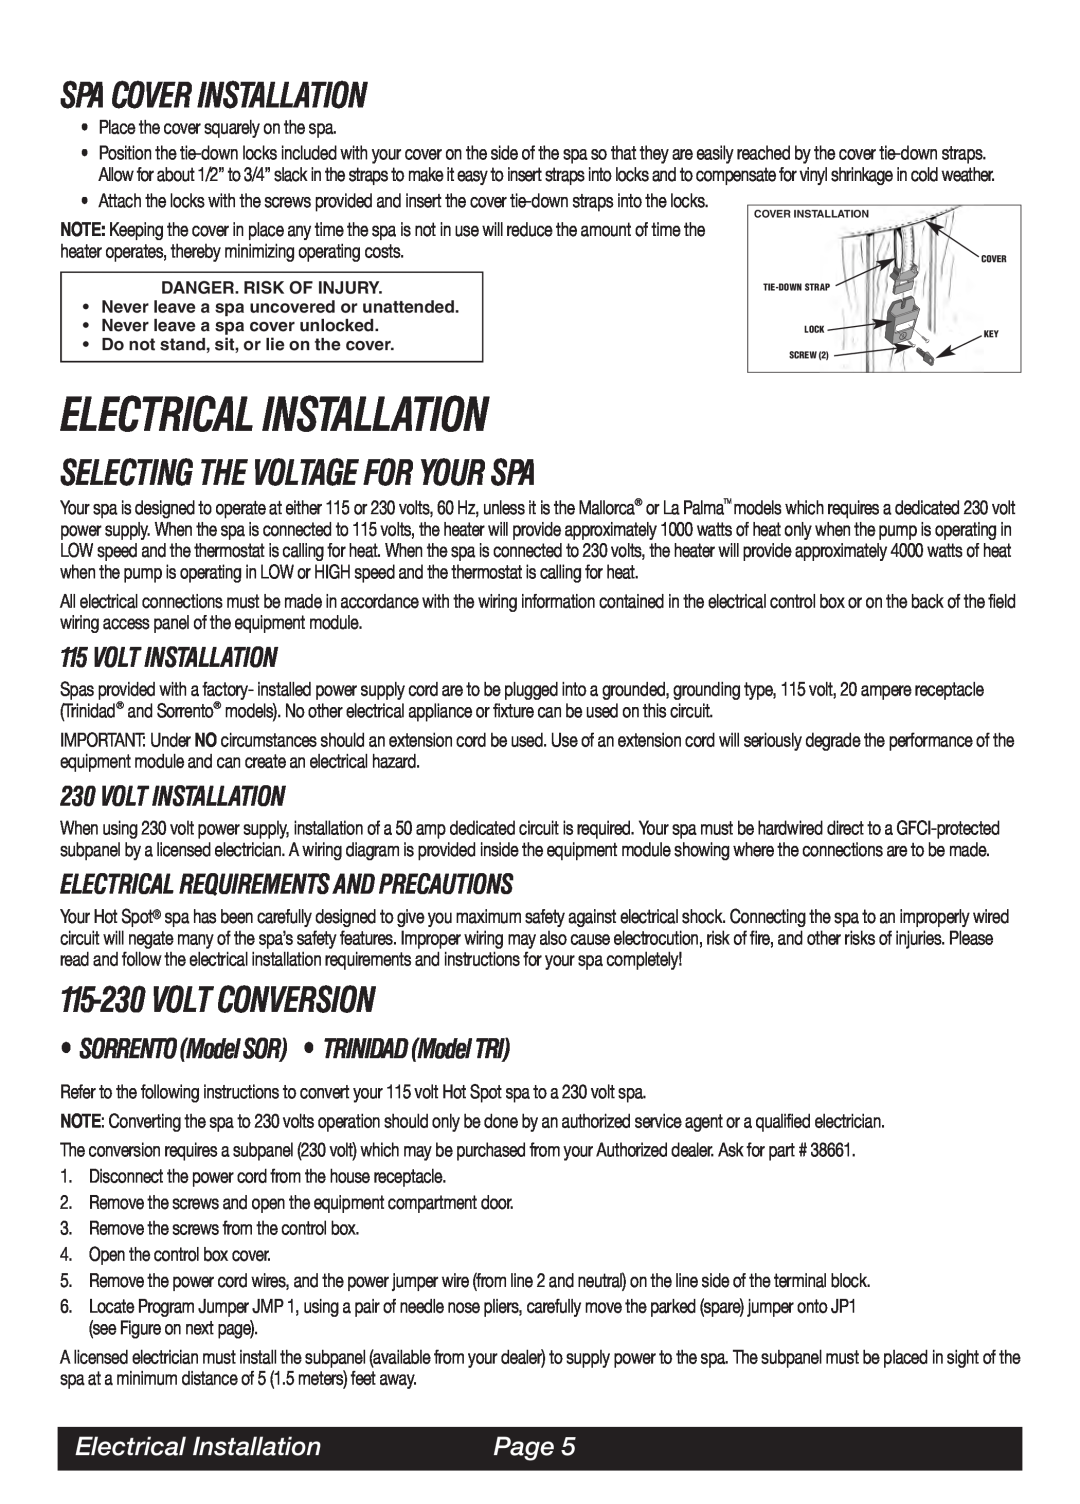 Watkins LAP Electrical Installation, Spa Cover Installation, Selecting The Voltage For Your Spa, 115-230VOLT CONVERSION 